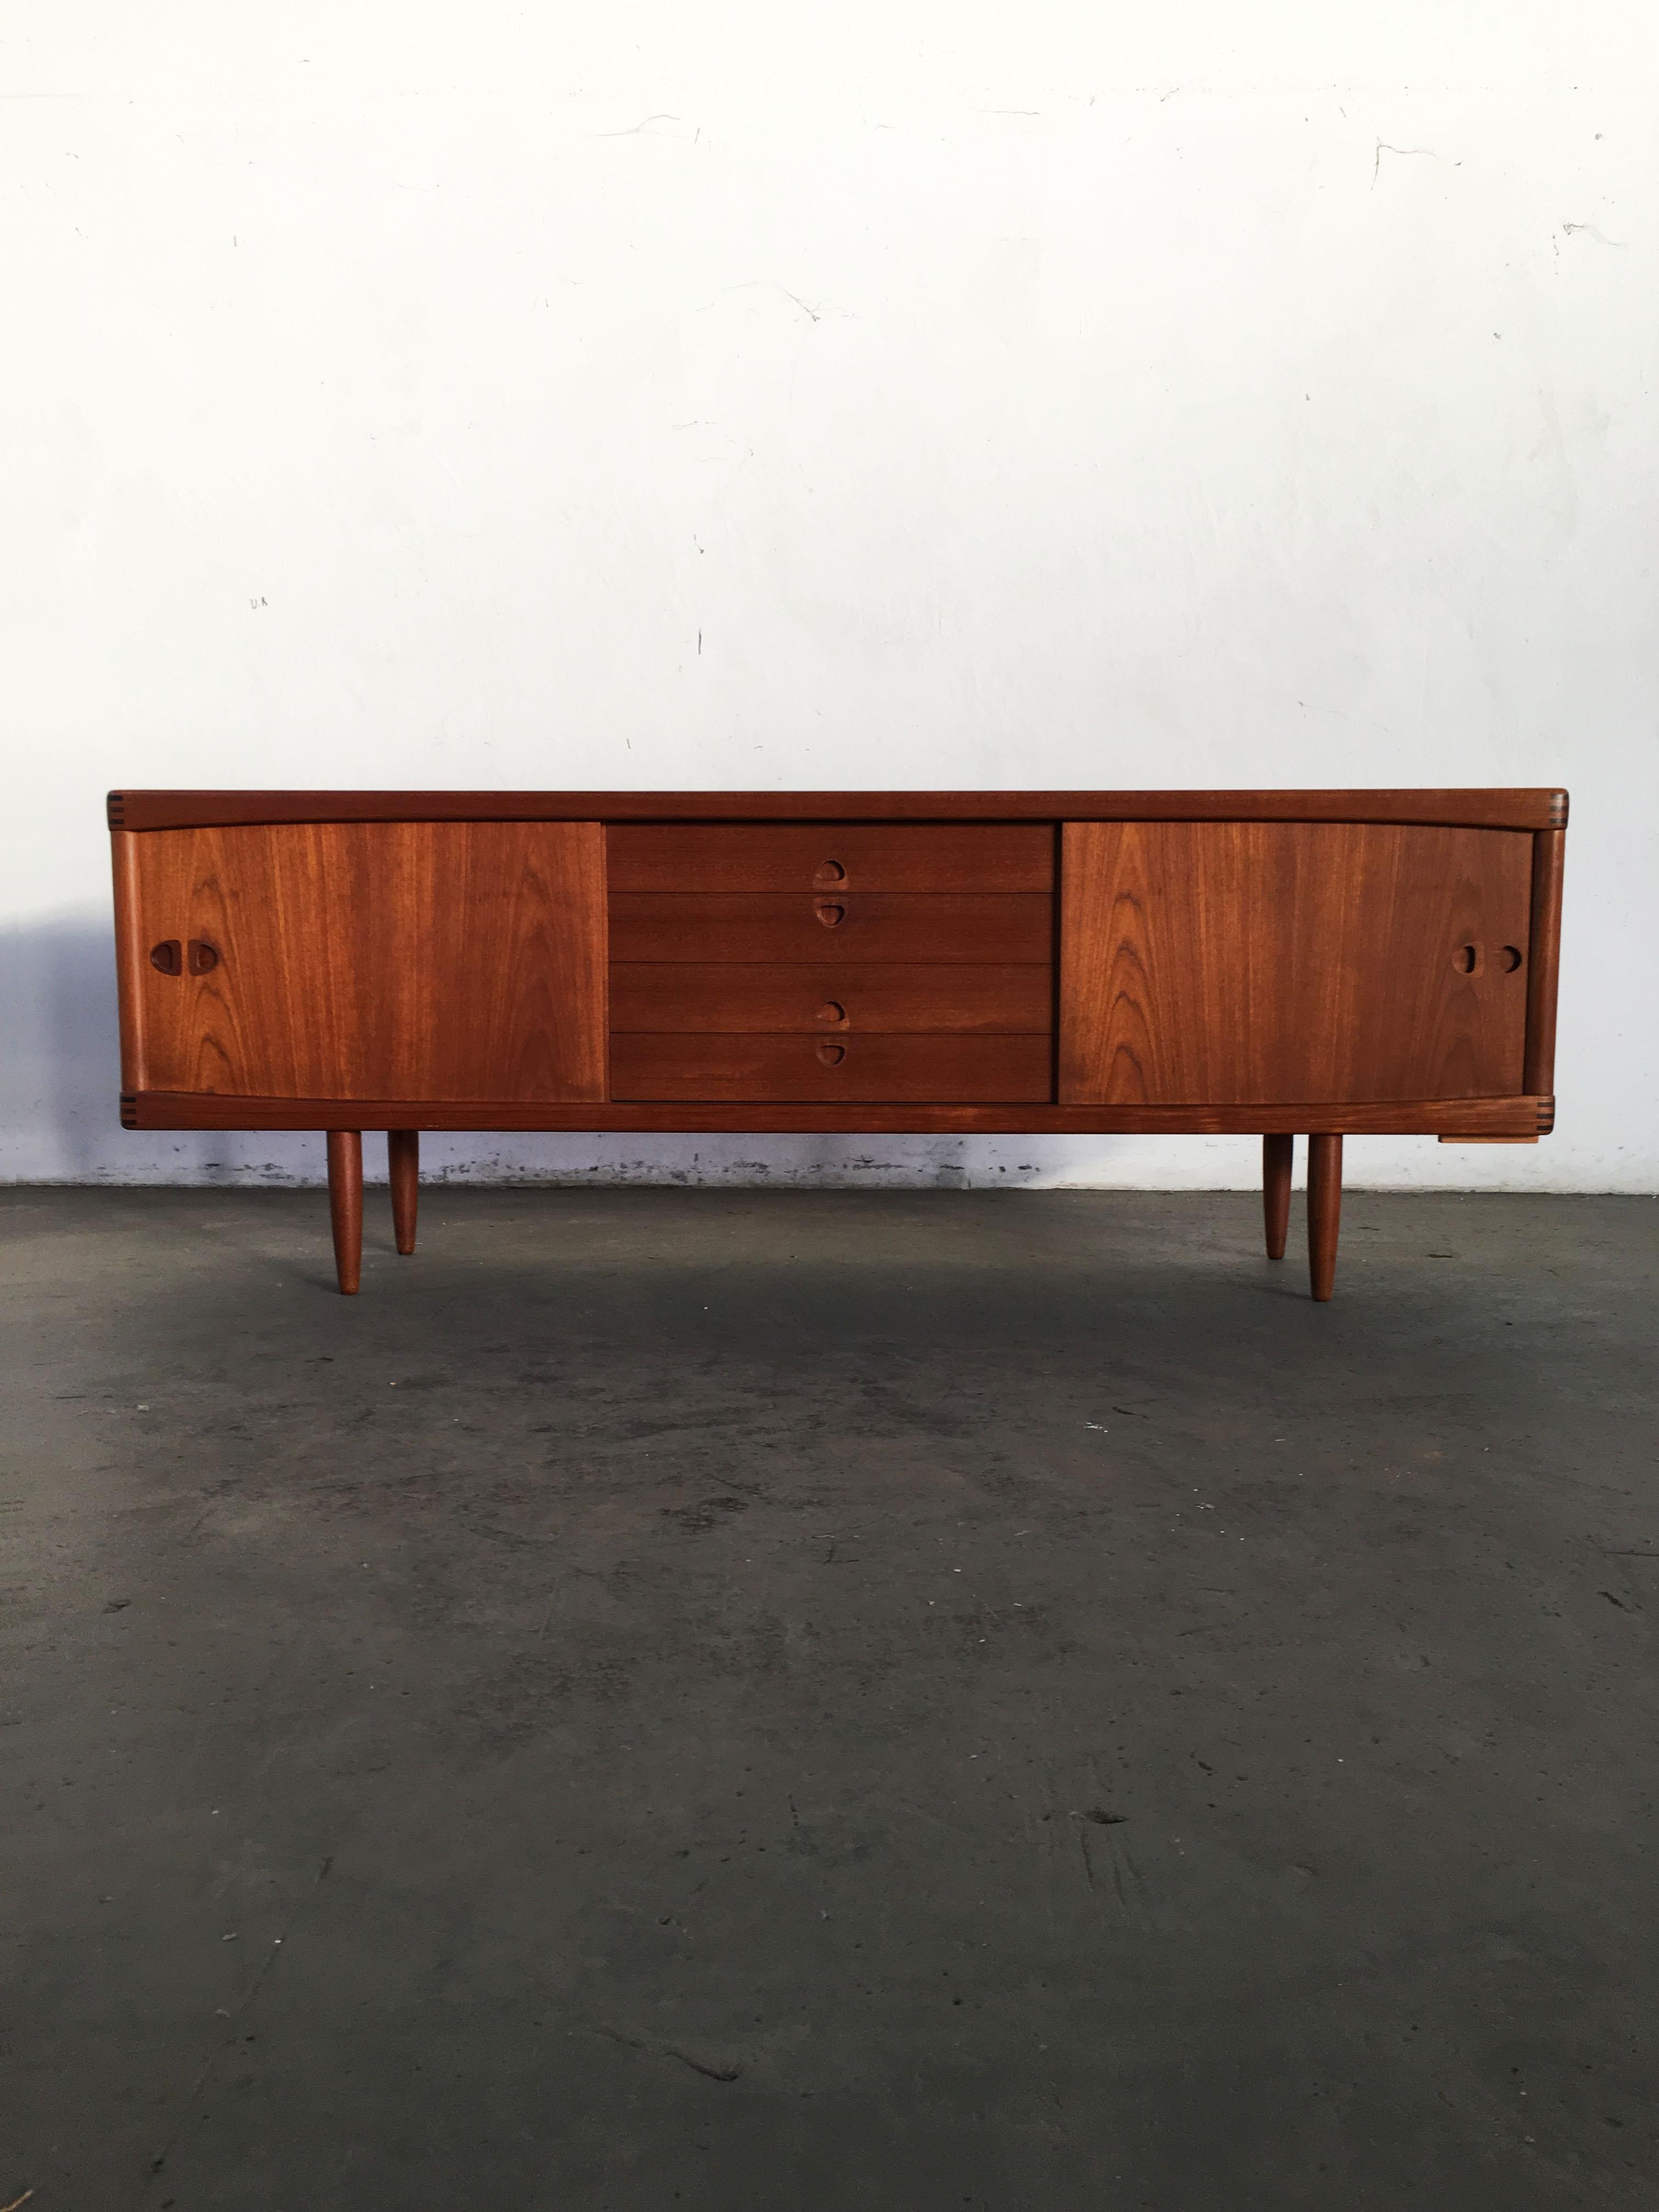 Superbly build solid teak sideboard by Danish designer Henry Walter Klein. Manufactured by Bramin Møbler, Denmark, 1960s. Beautiful teak grain on the front and top, comes with two sliding doors with adjustable shelves behind and four central